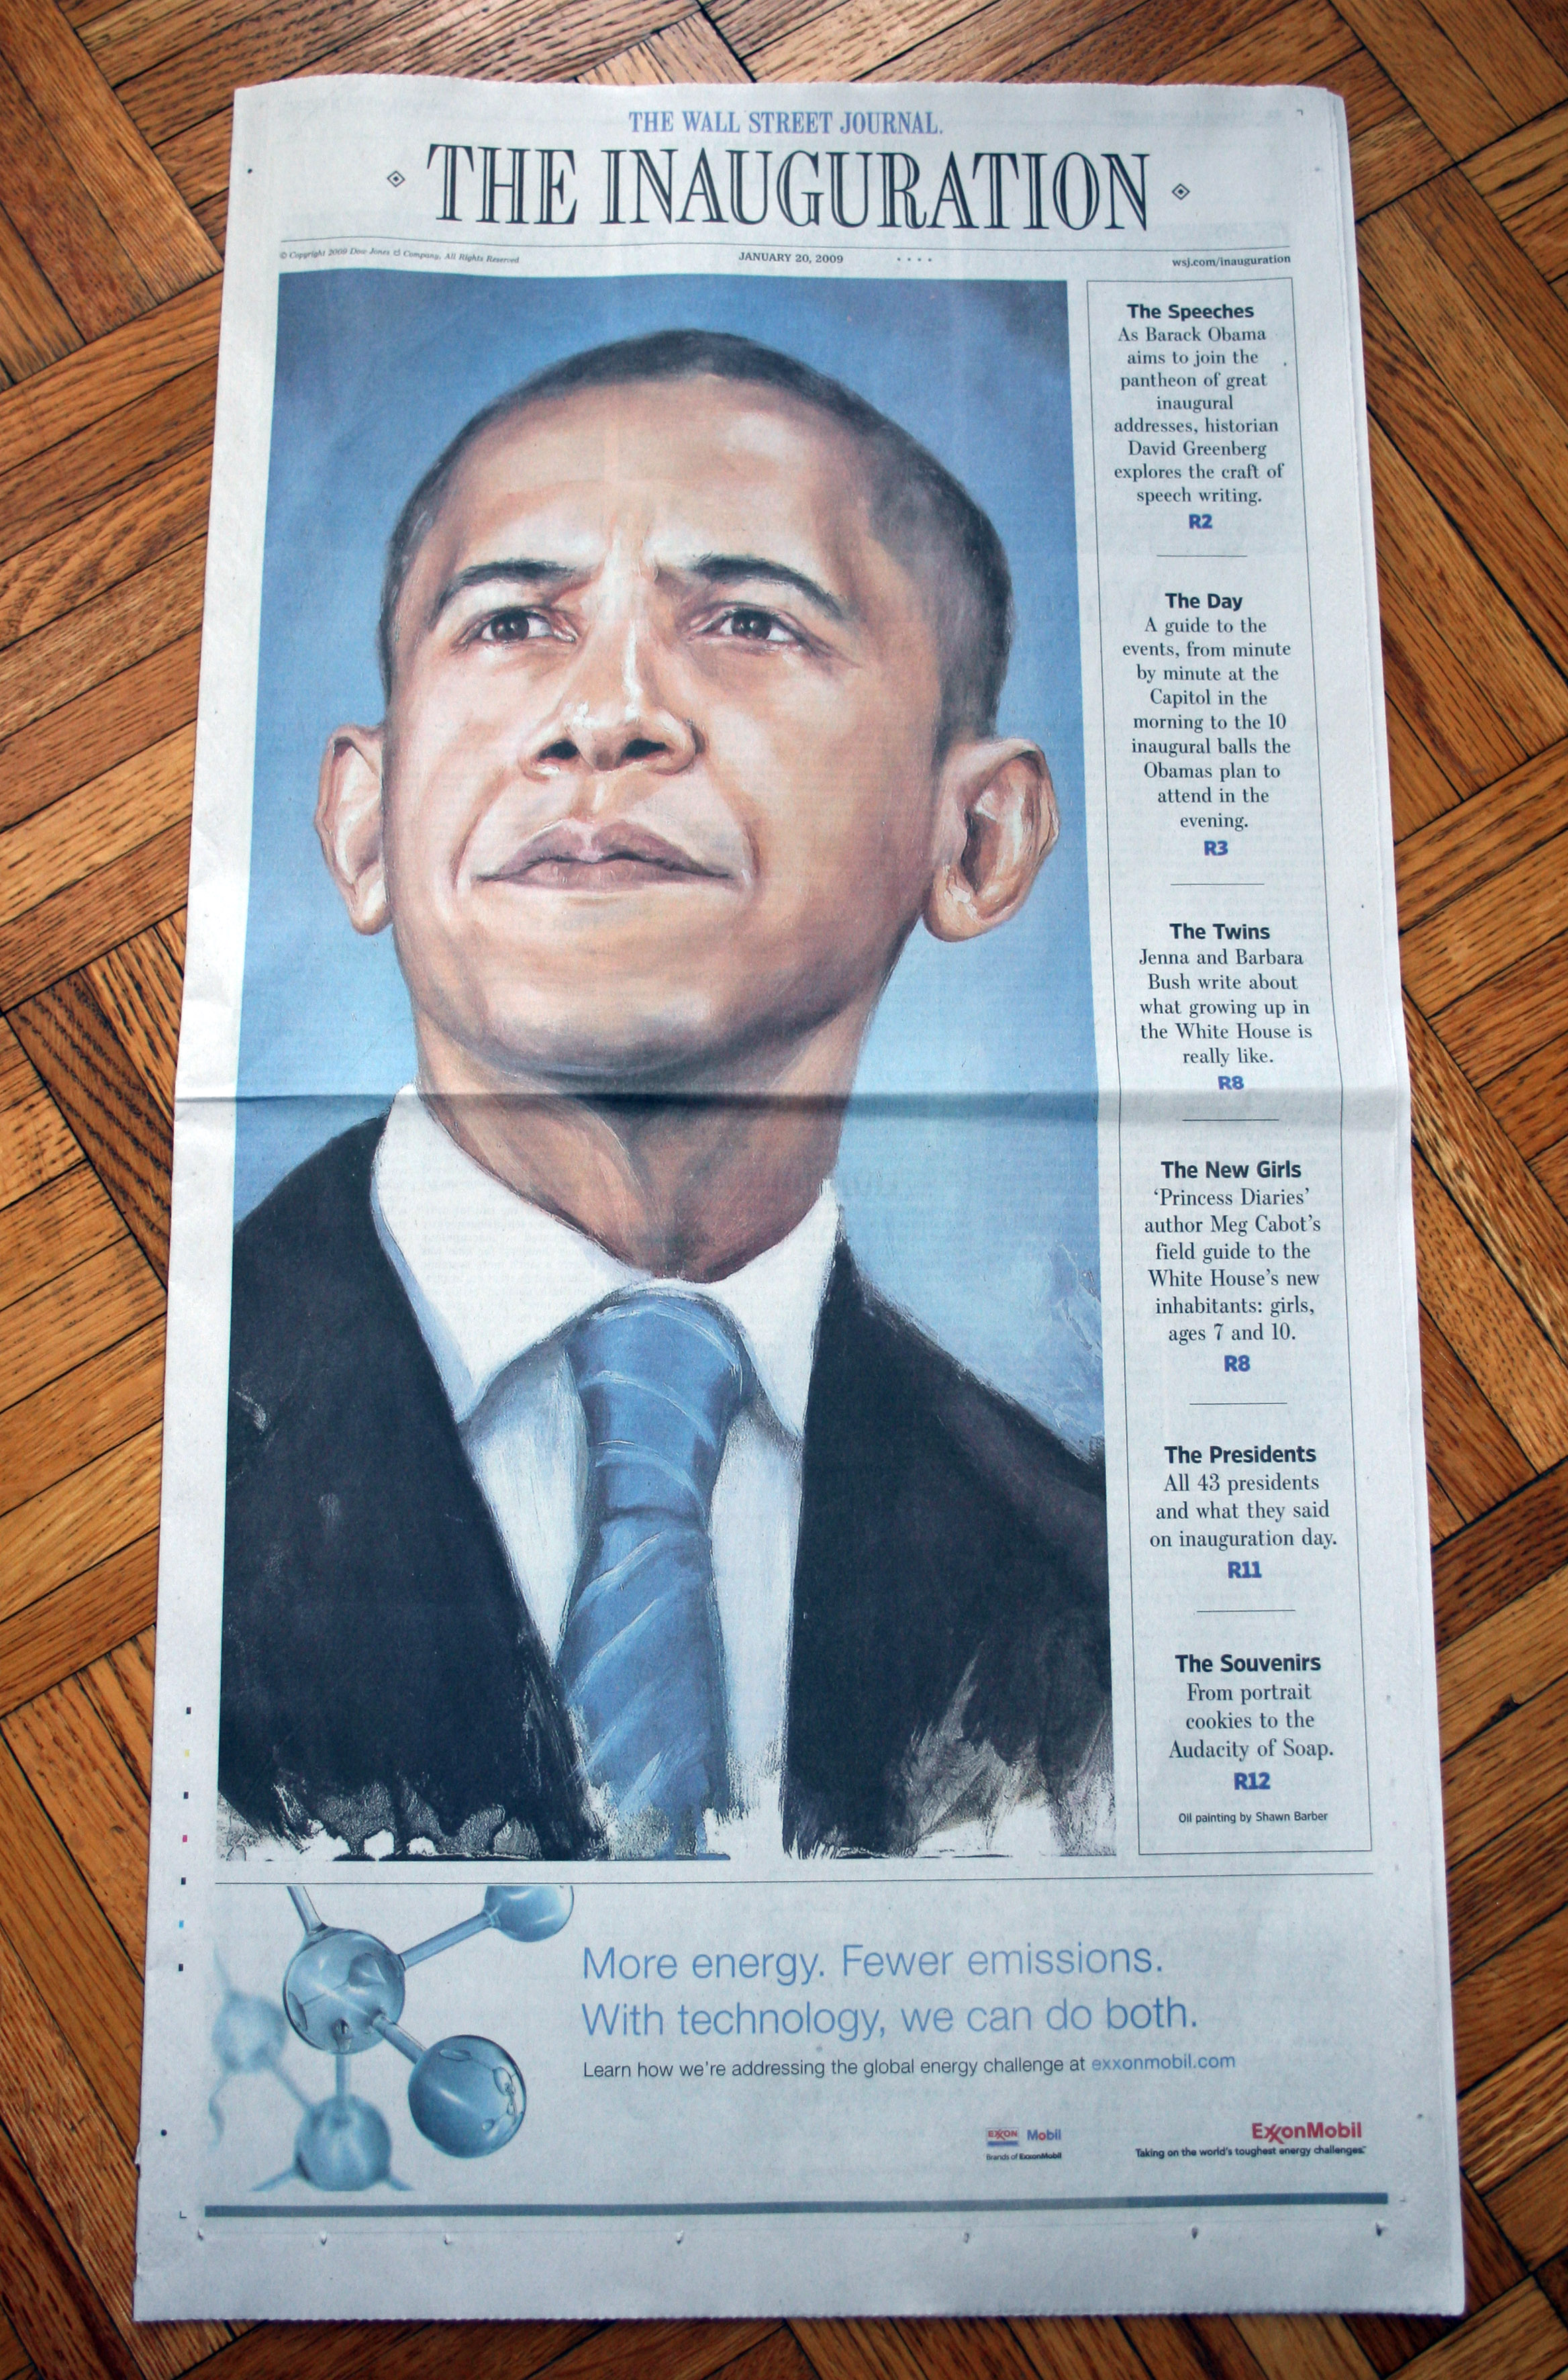 'Portrait of Barack Obama' for Wall Street Journal's Inauguration Issue, 2009